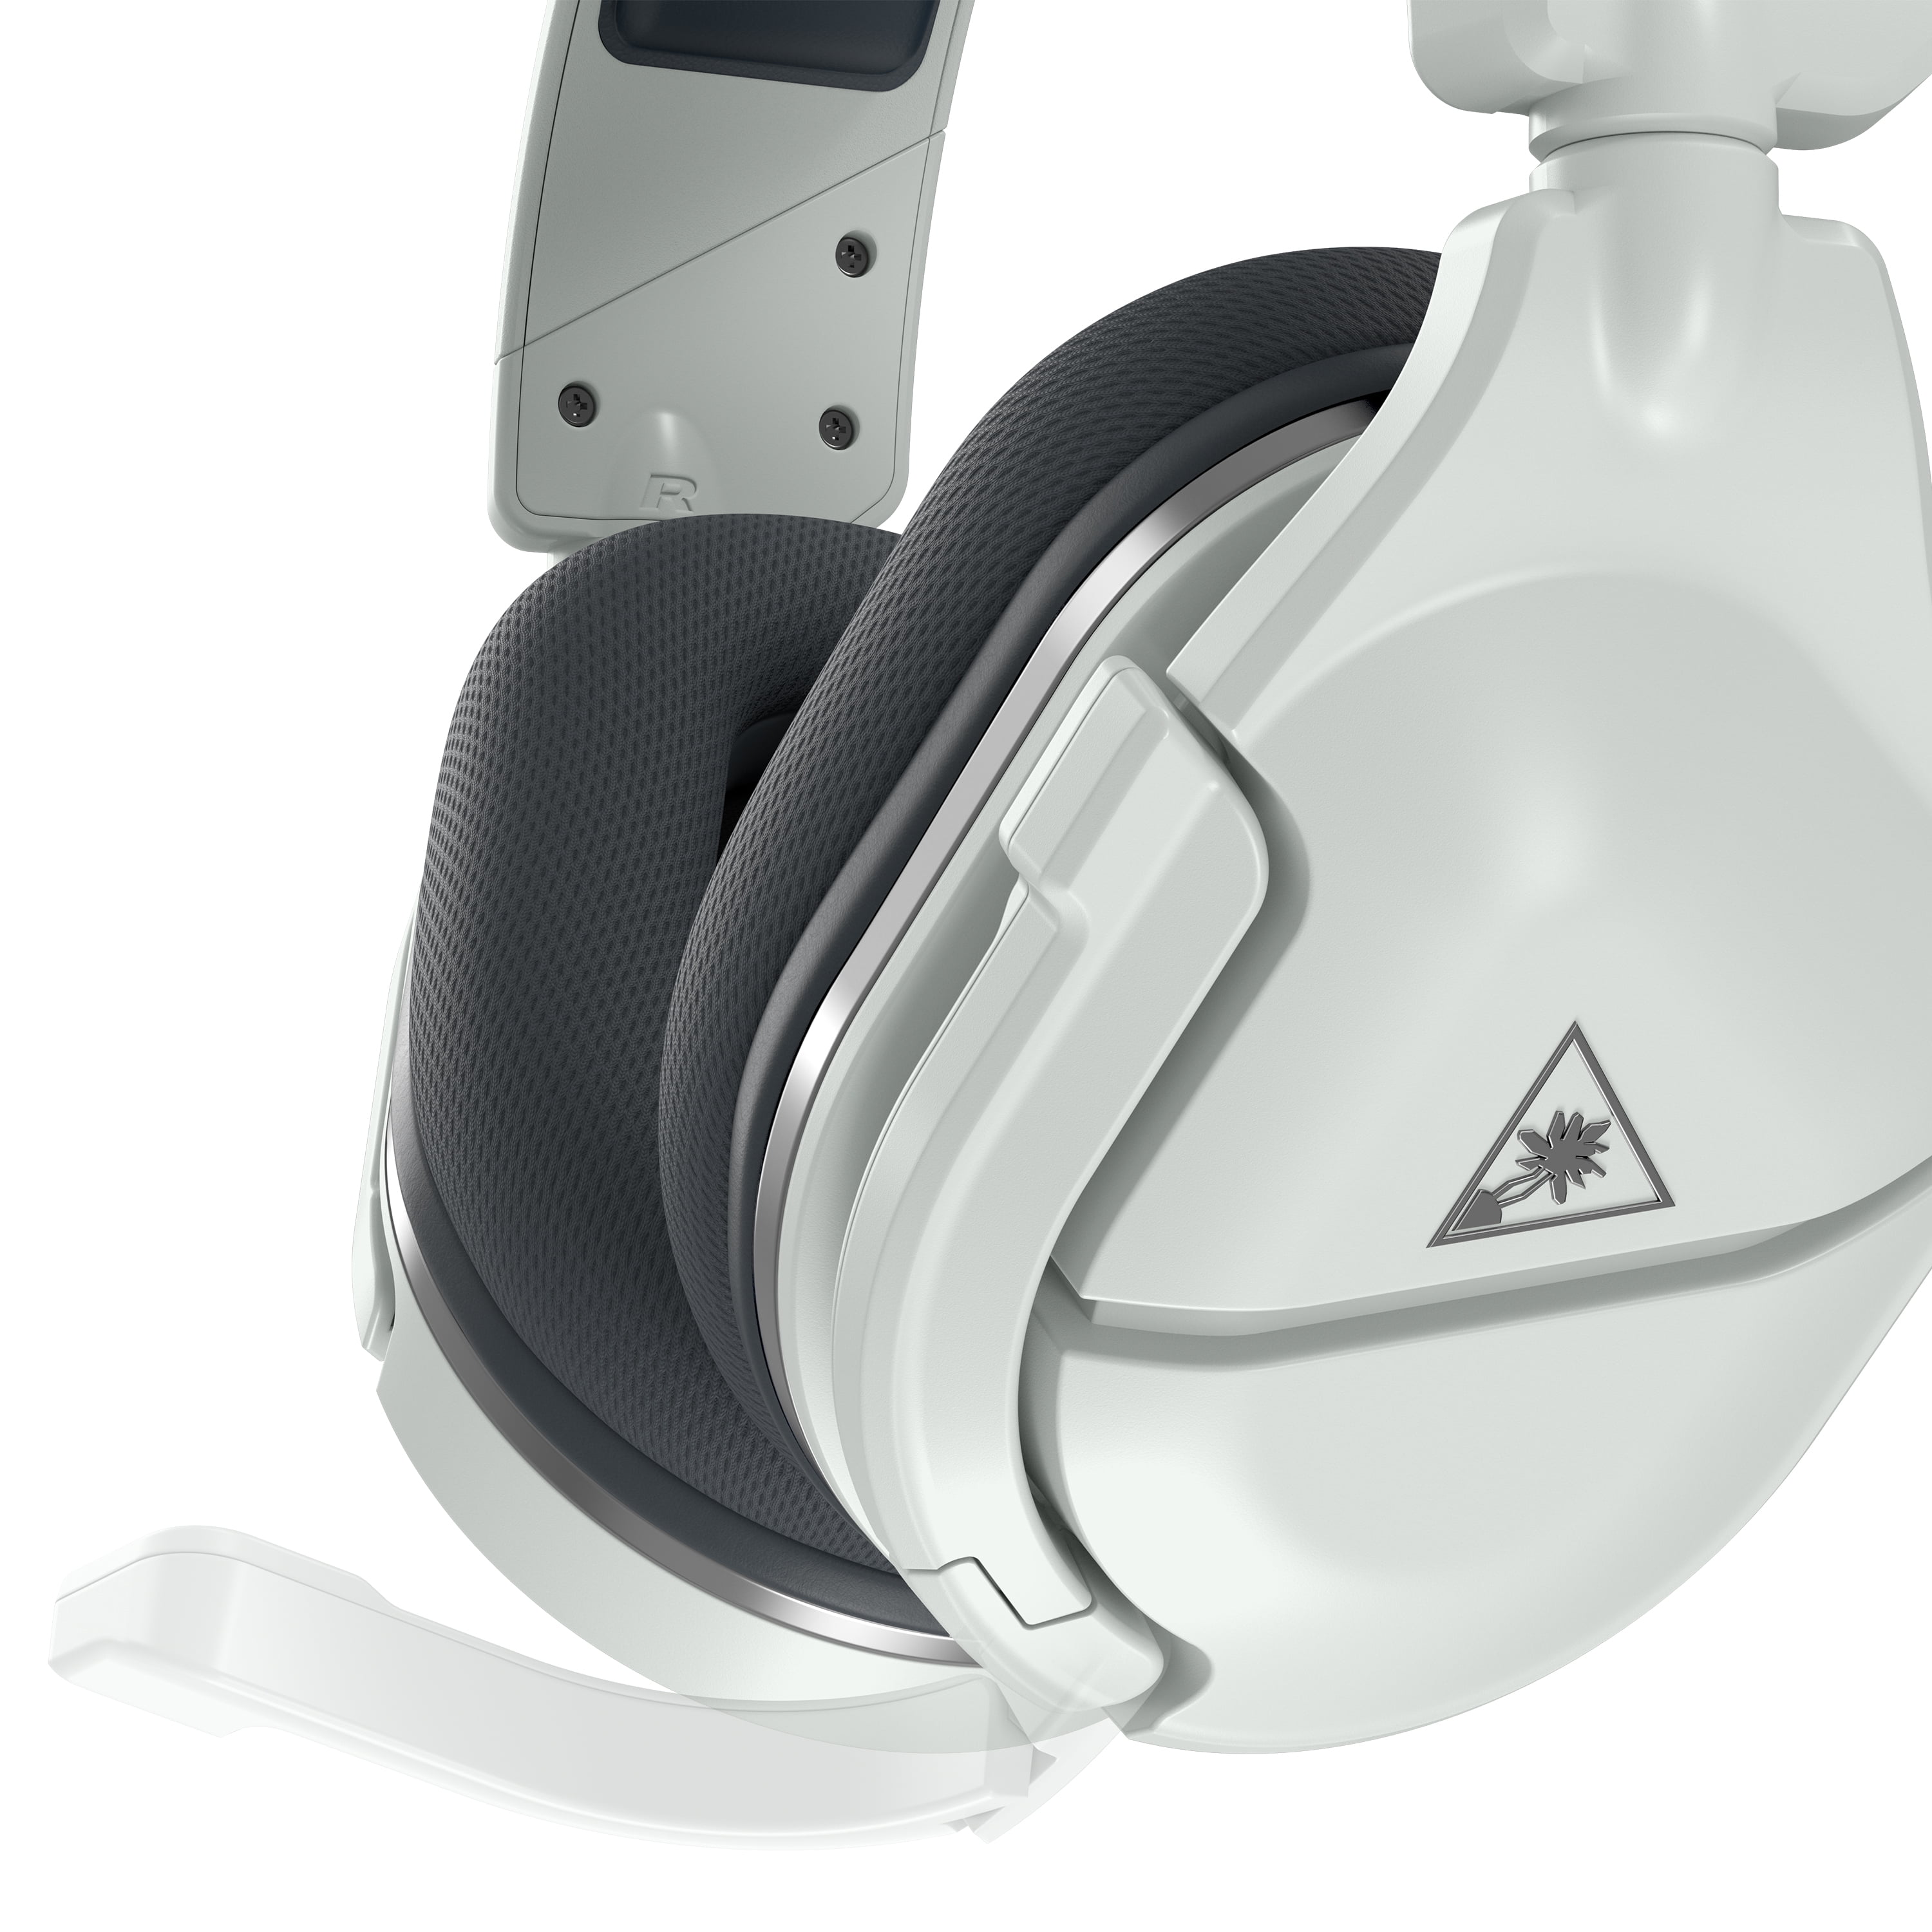 Turtle Beach Stealth 600 Gen 2 Wireless Gaming Headset for PS5